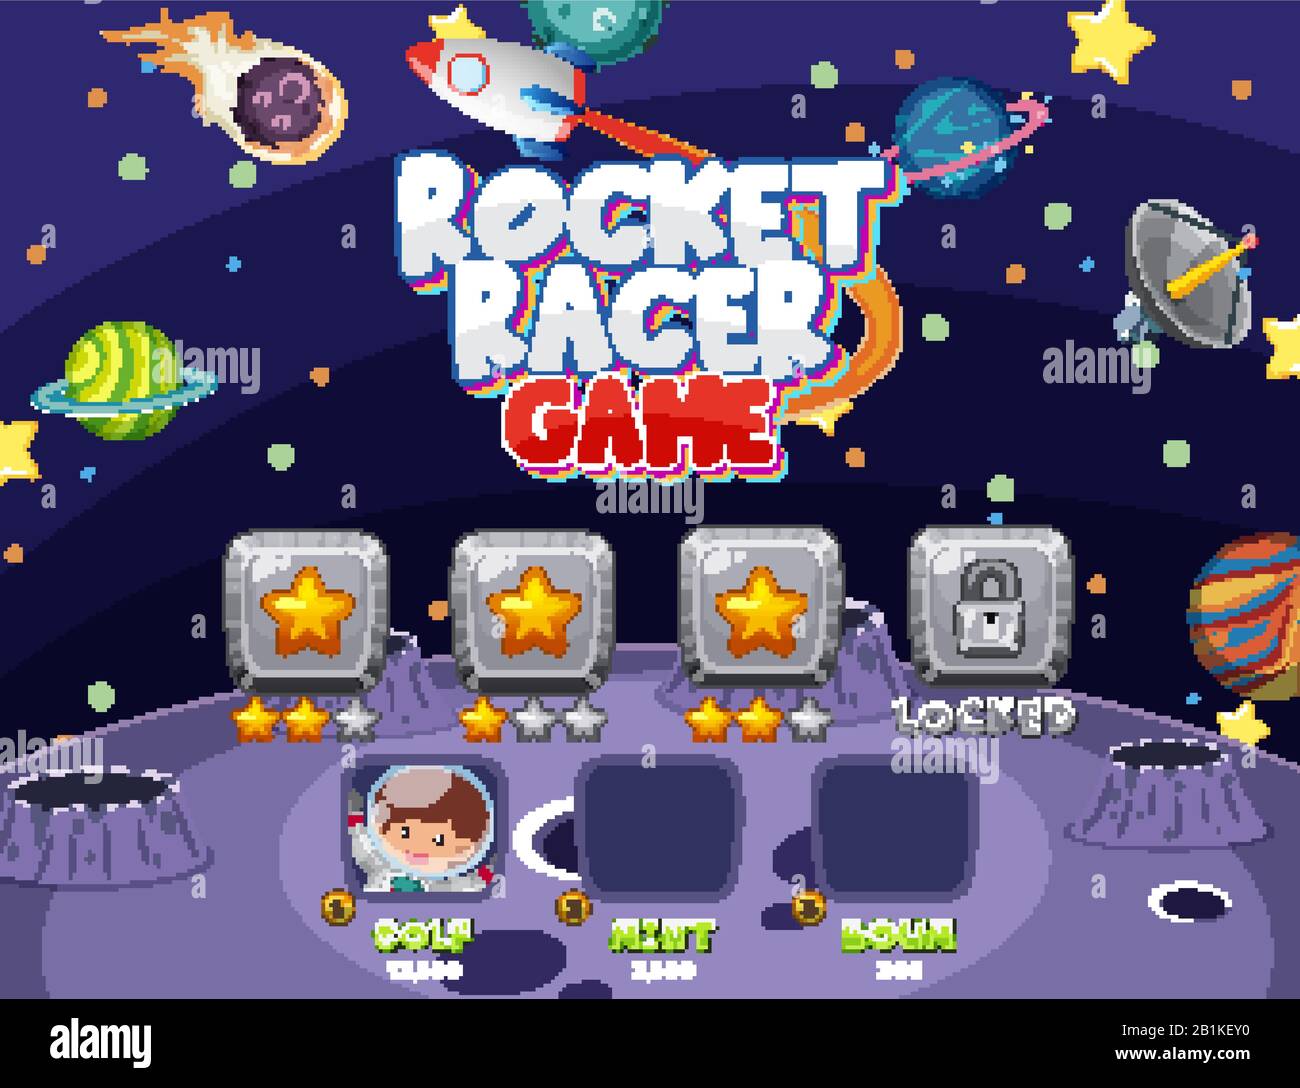 Computer game template with astronaut and many planets in space illustration Stock Vector